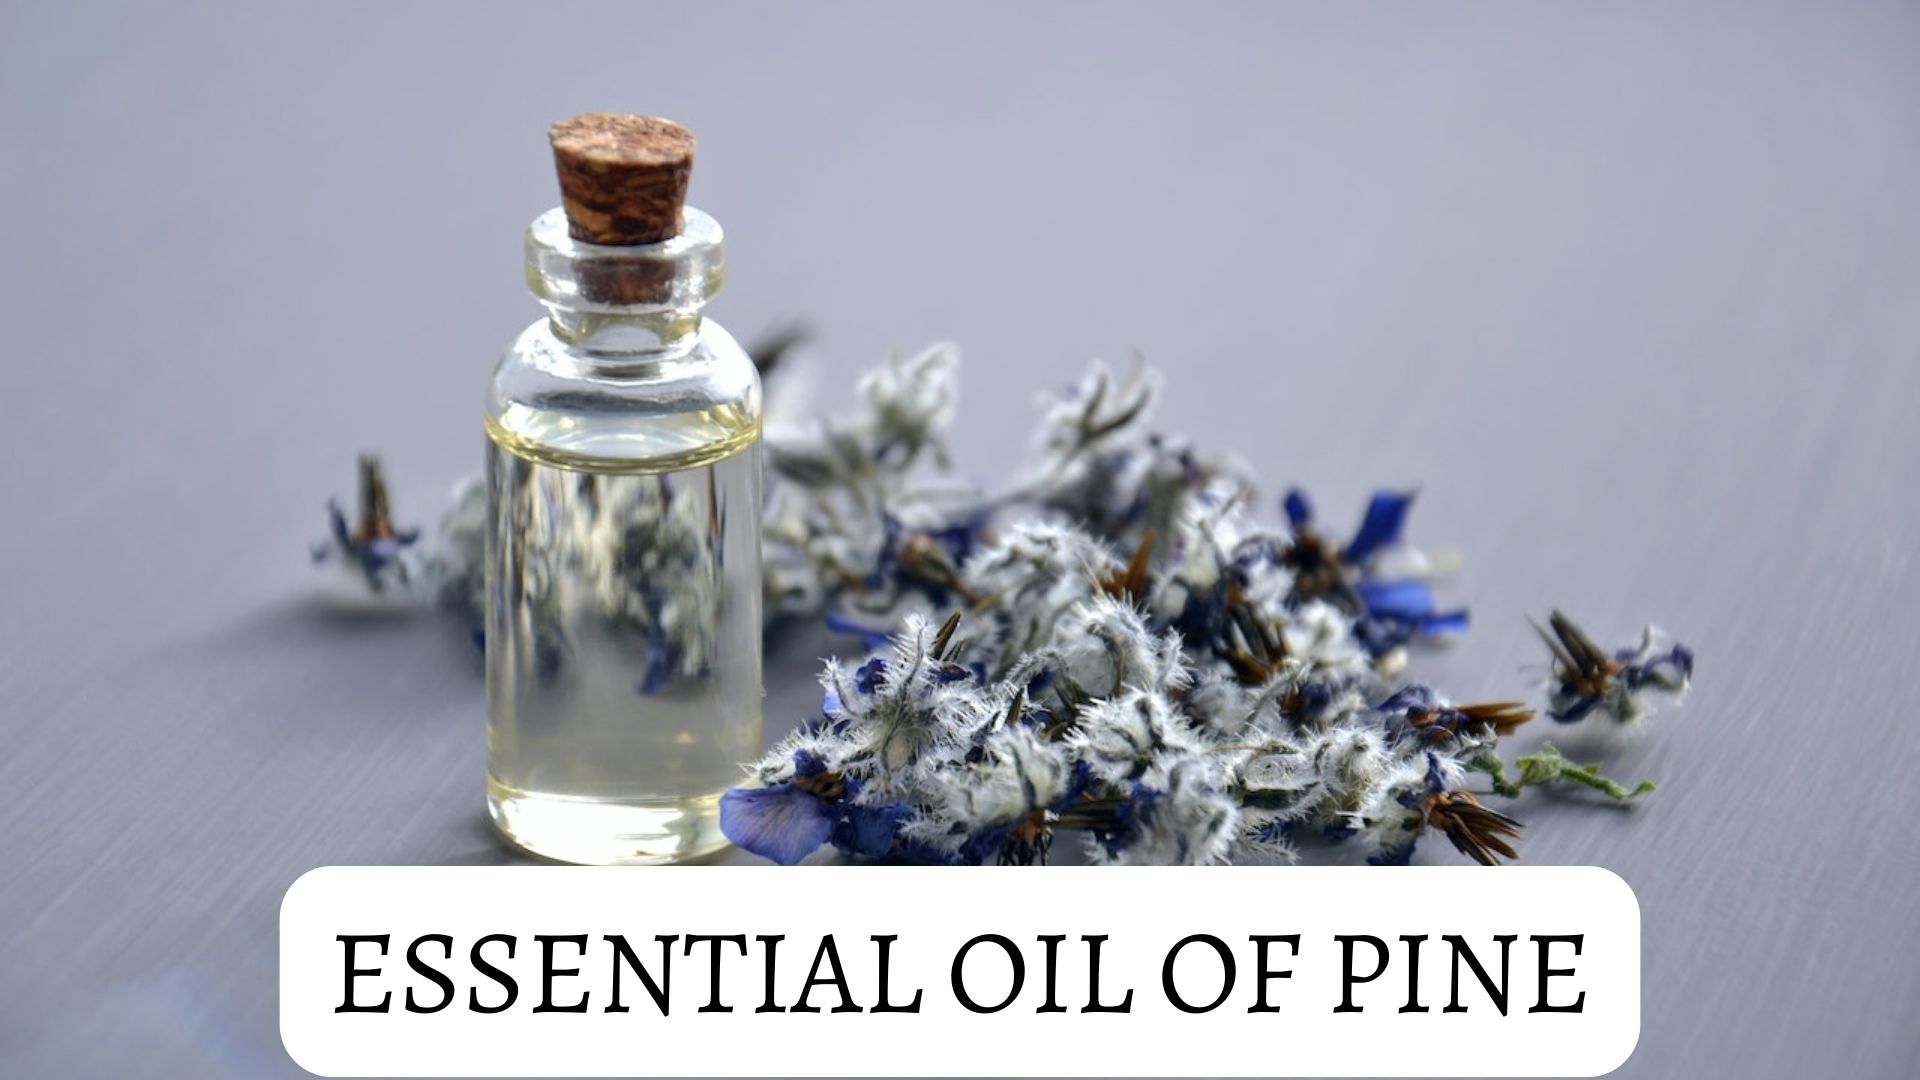 Essential Oil Of Pine - Known To Be An Antiseptic